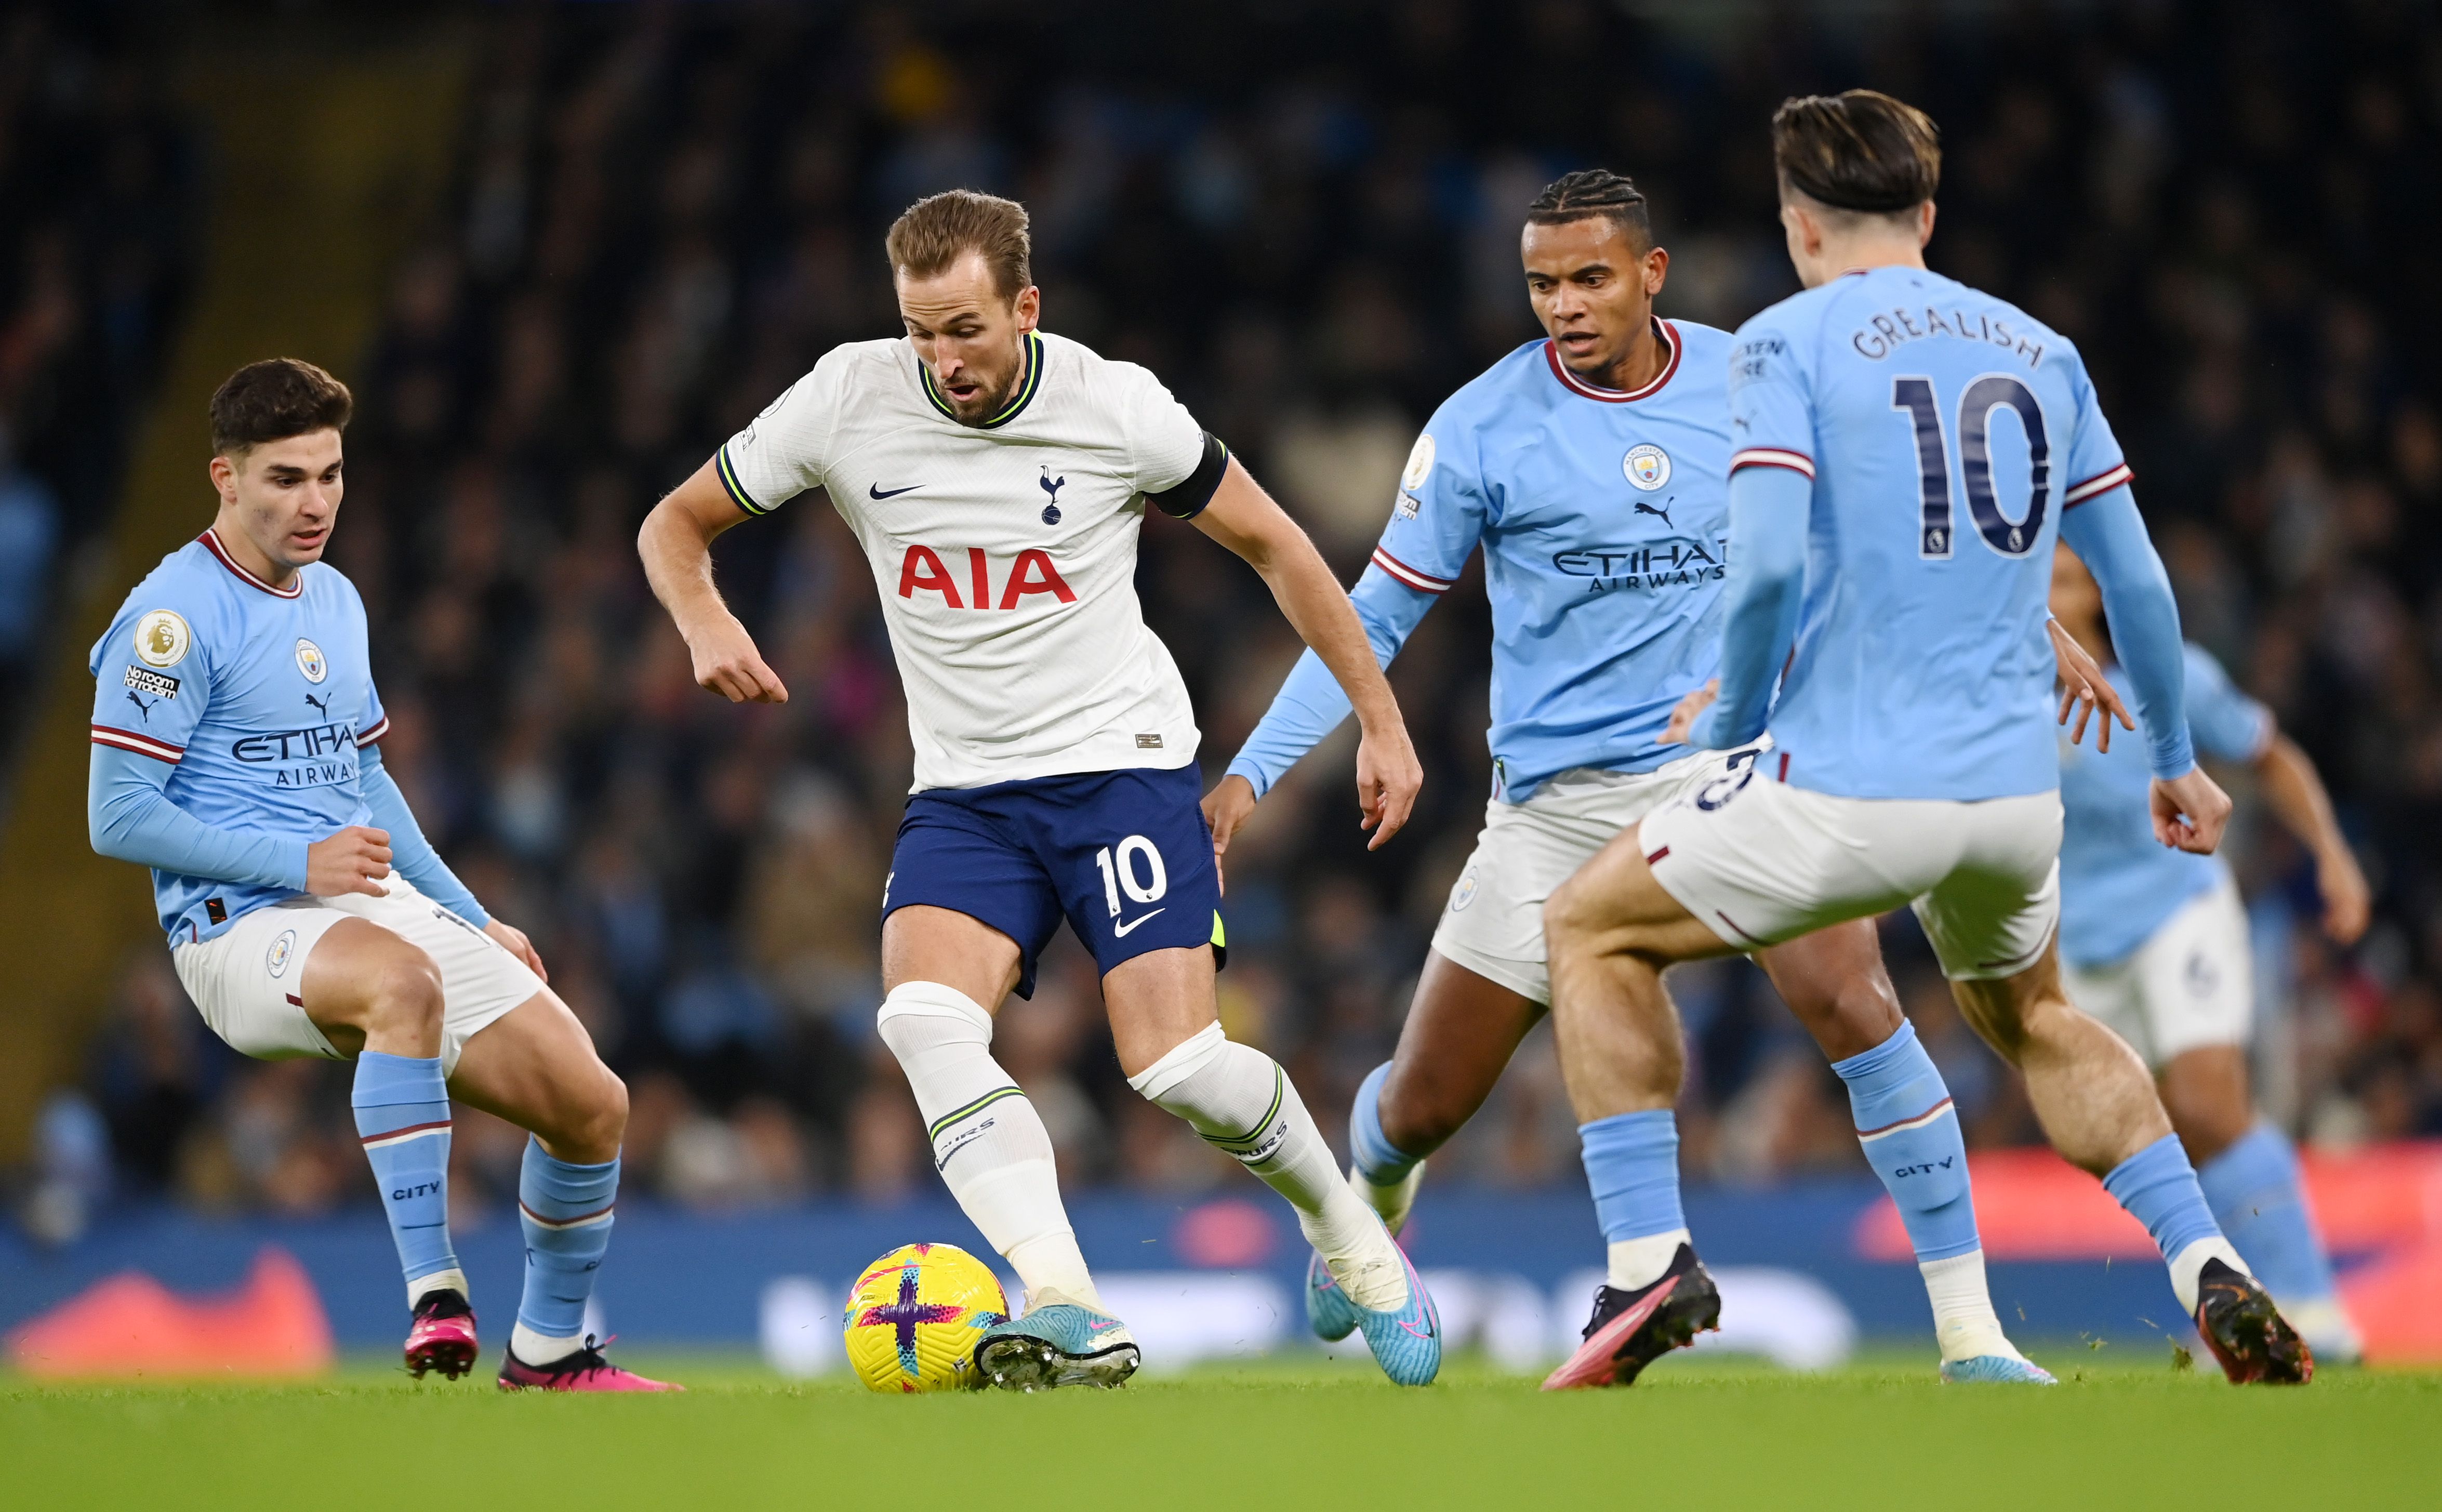  Harry Kane of Tottenham Hotspur is challenged by Julian Alvarez and Manuel Akanji of Manchester City during the Premier League match between Manchester City and Tottenham Hotspur at Etihad Stadium on January 19, 2023 in Manchester, England. 